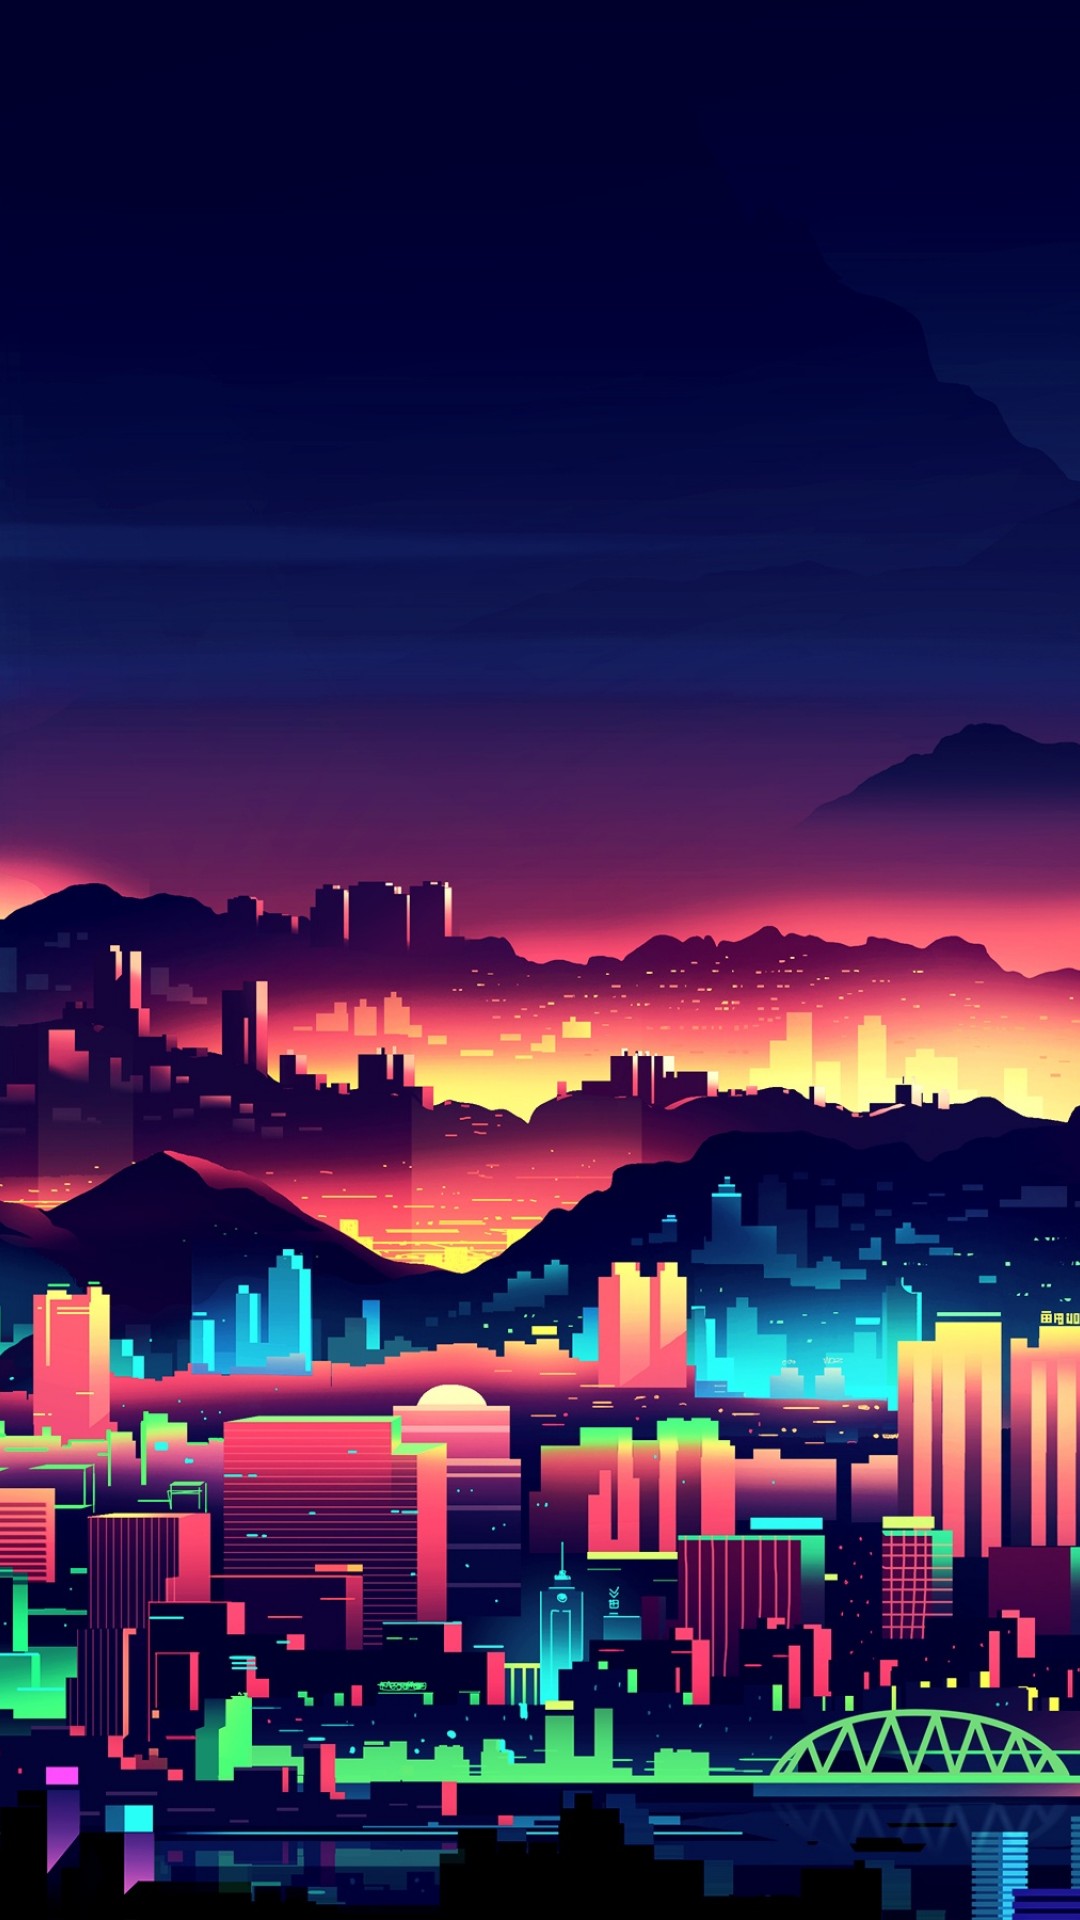 Neon City Wallpaper for Desktop and Mobiles iPhone 6 / 6S Plus